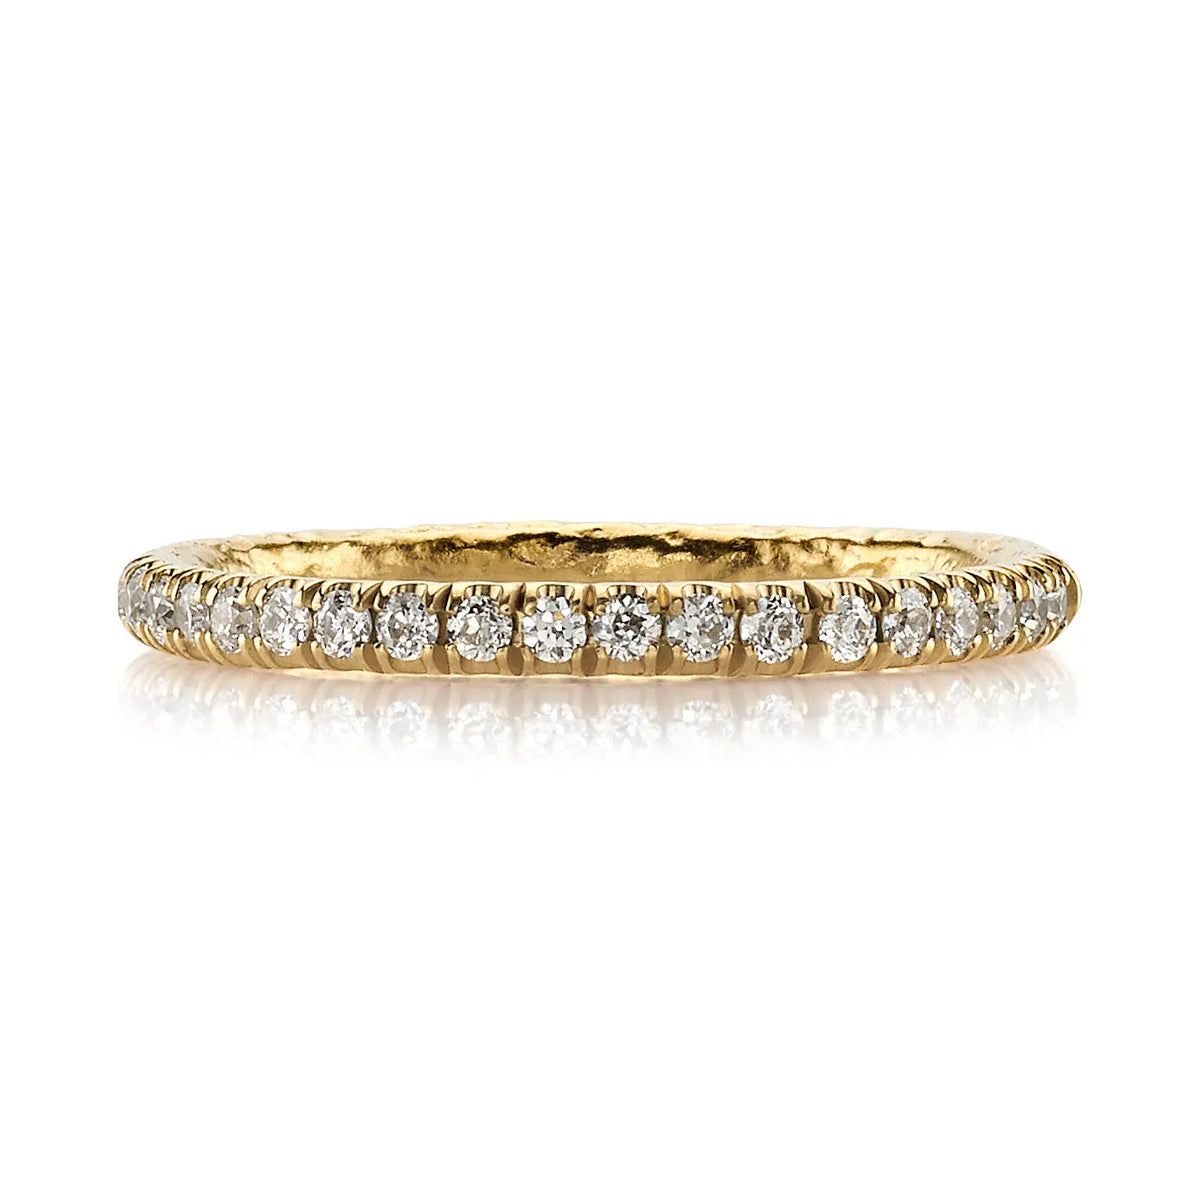 18k Yellow Gold with Approximately 0.24ctw G-H/VS old European cut diamonds pave set in a handcrafted hammered 22K yellow gold half eternity band.   Size: 6.5  If you need a different size, please email shop@sbvail.com. If an item is out of stock, please allow 6-8 weeks for delivery.  Designed by Single Stone and made in LA